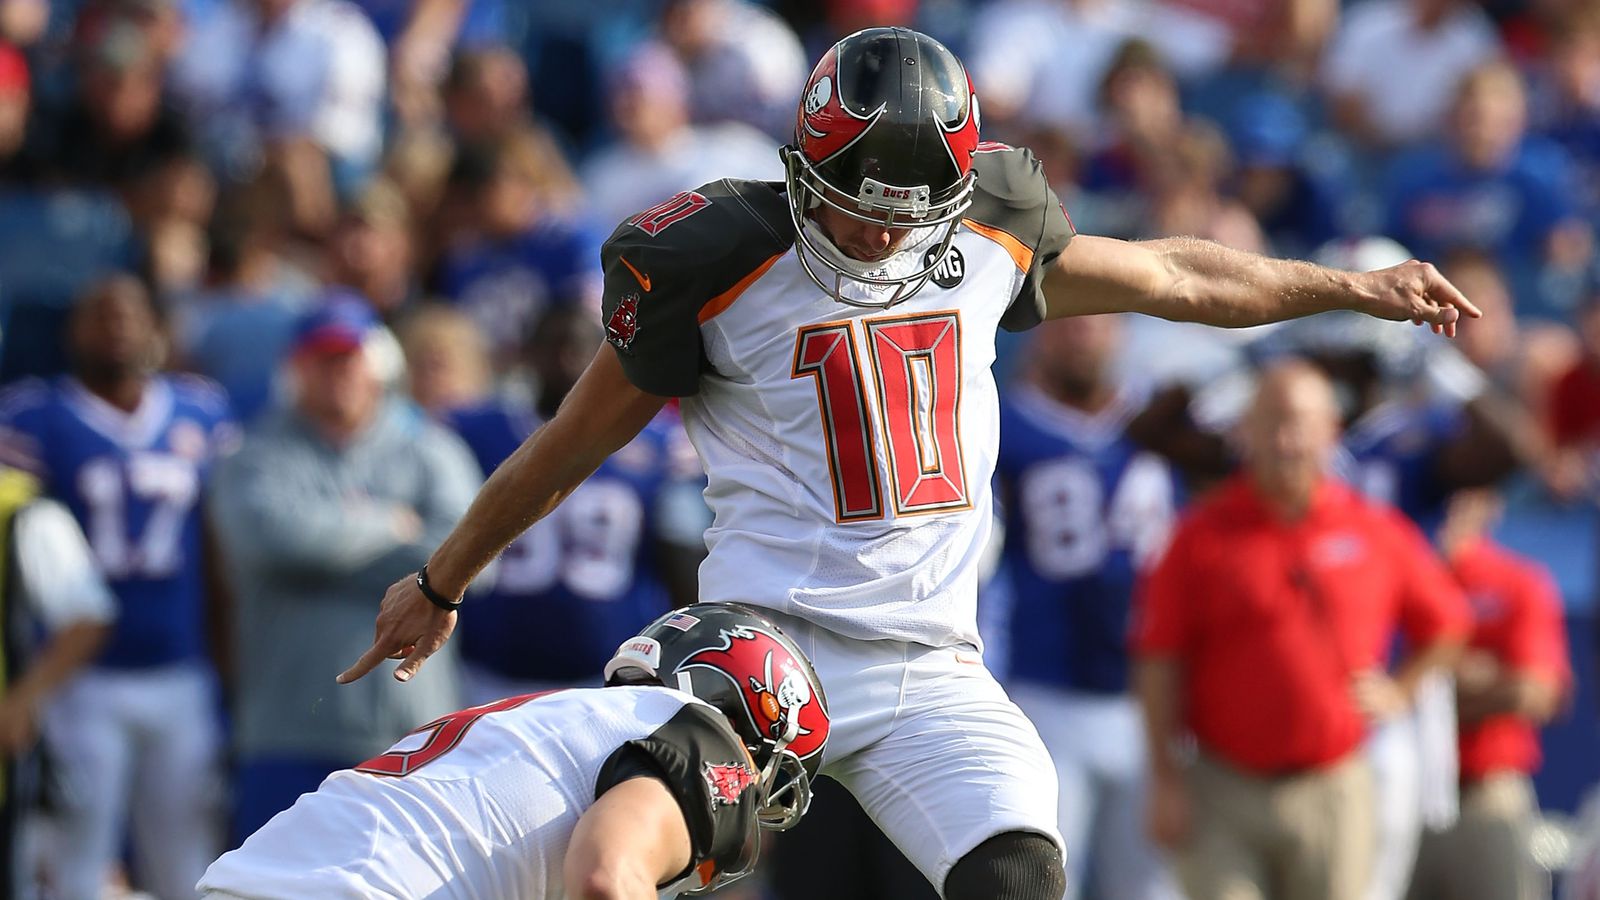 How much do clutch moments impact NFL field goal kickers? - Bucs Nation